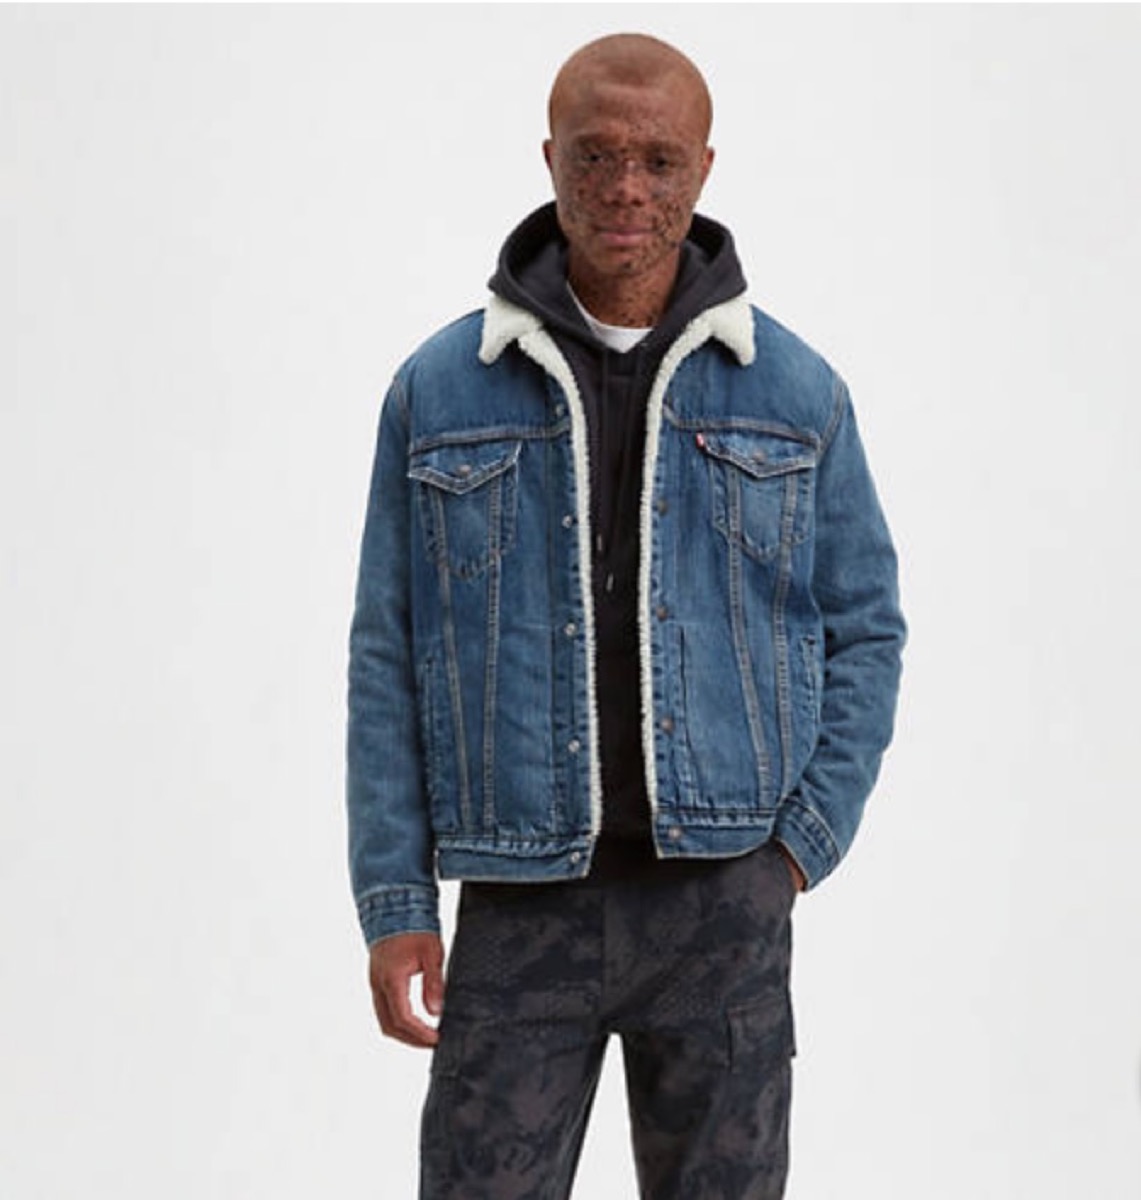 black man with freckles in denim jacket with fuzzy white collar and gray pants